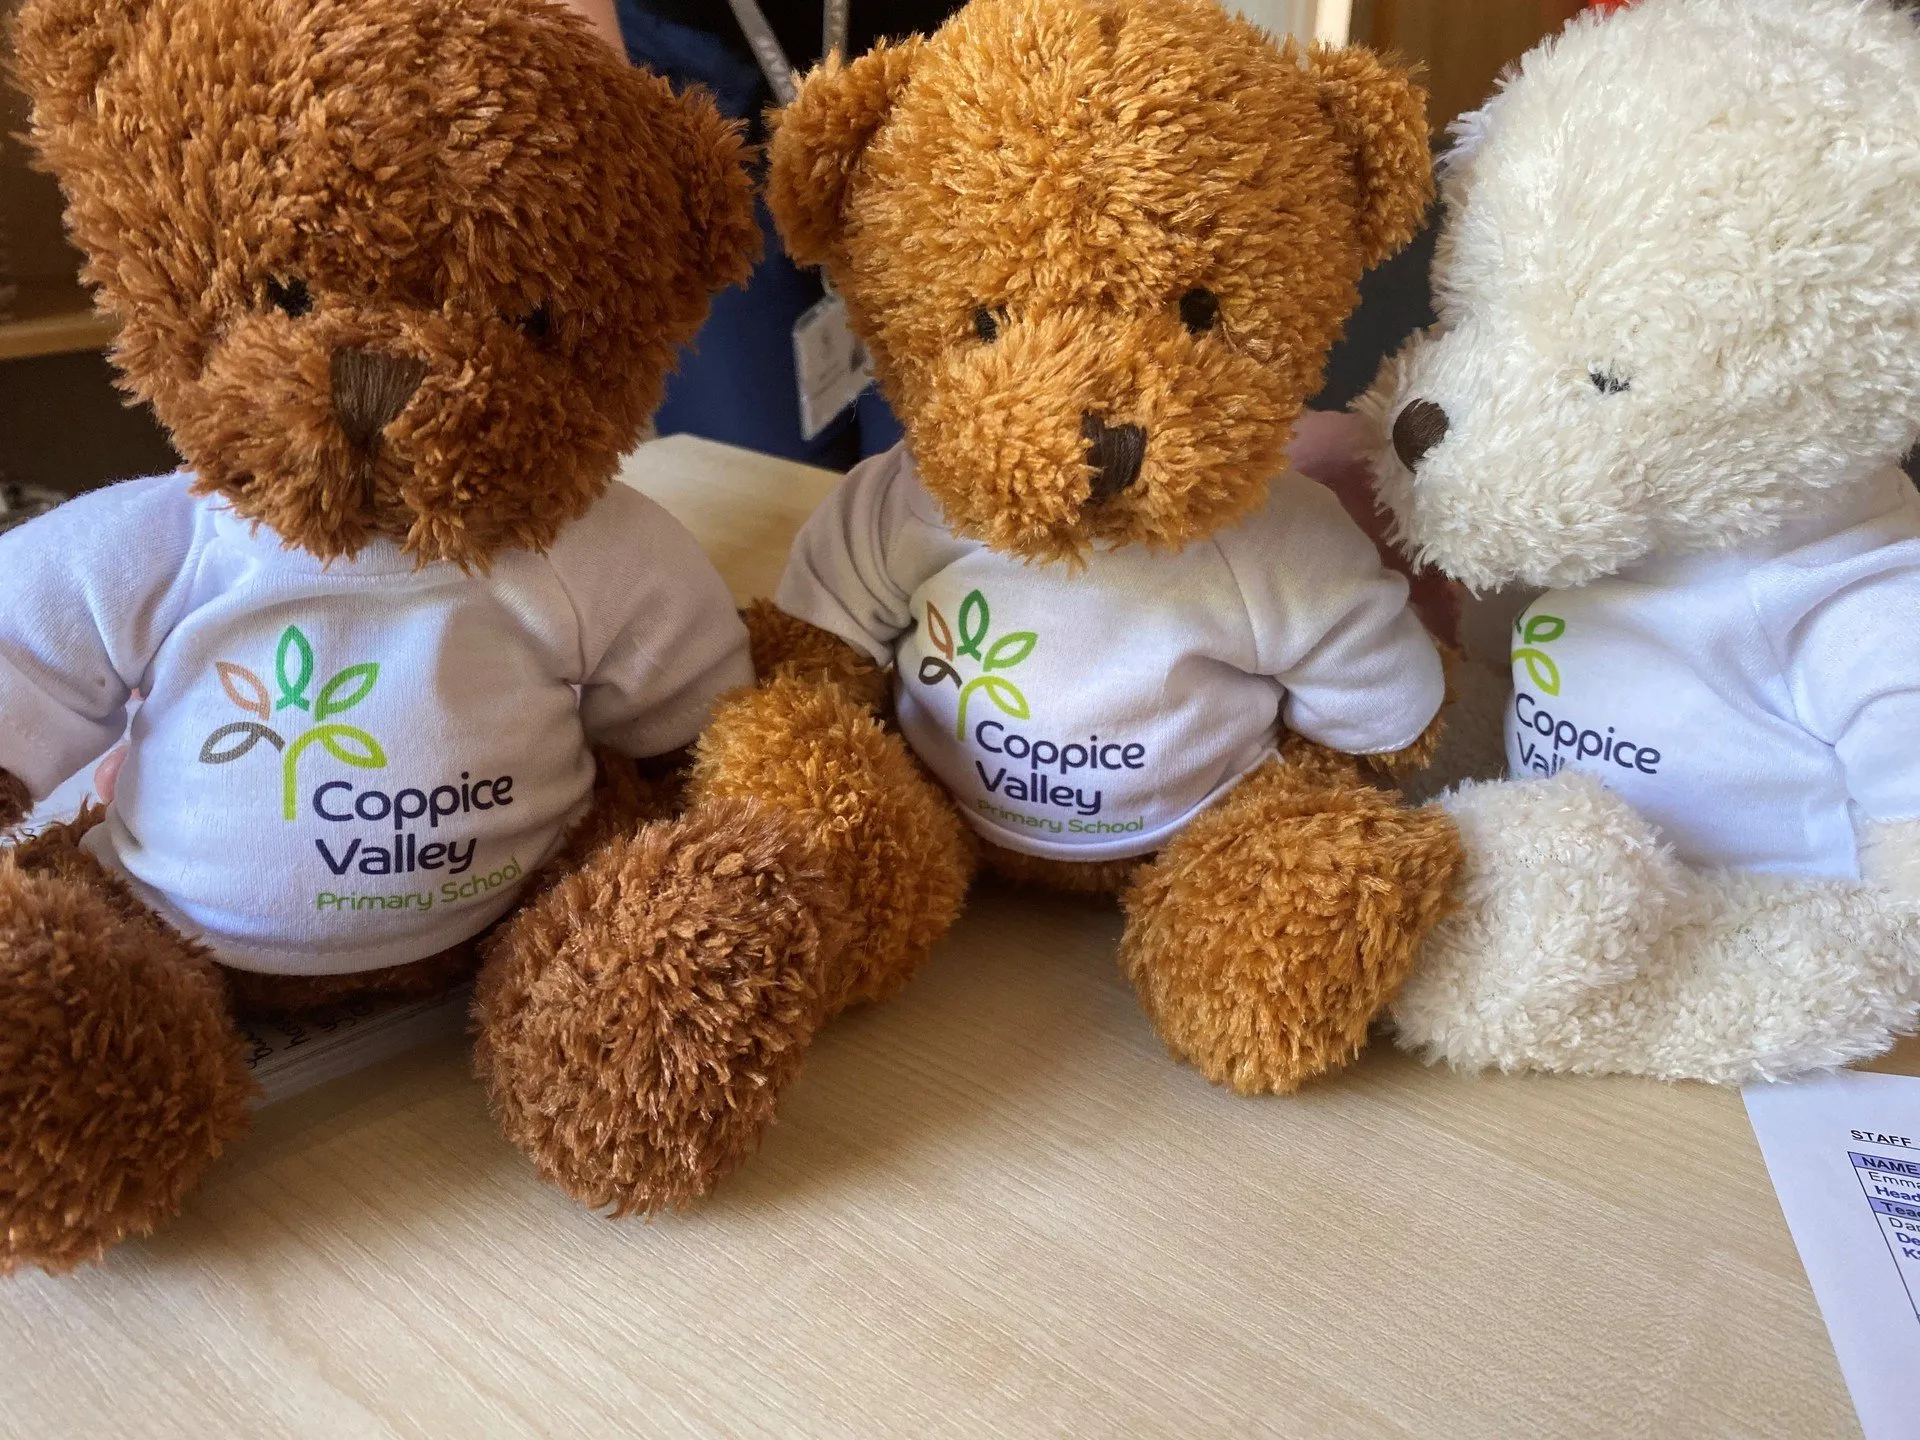 Coppice Valley bears